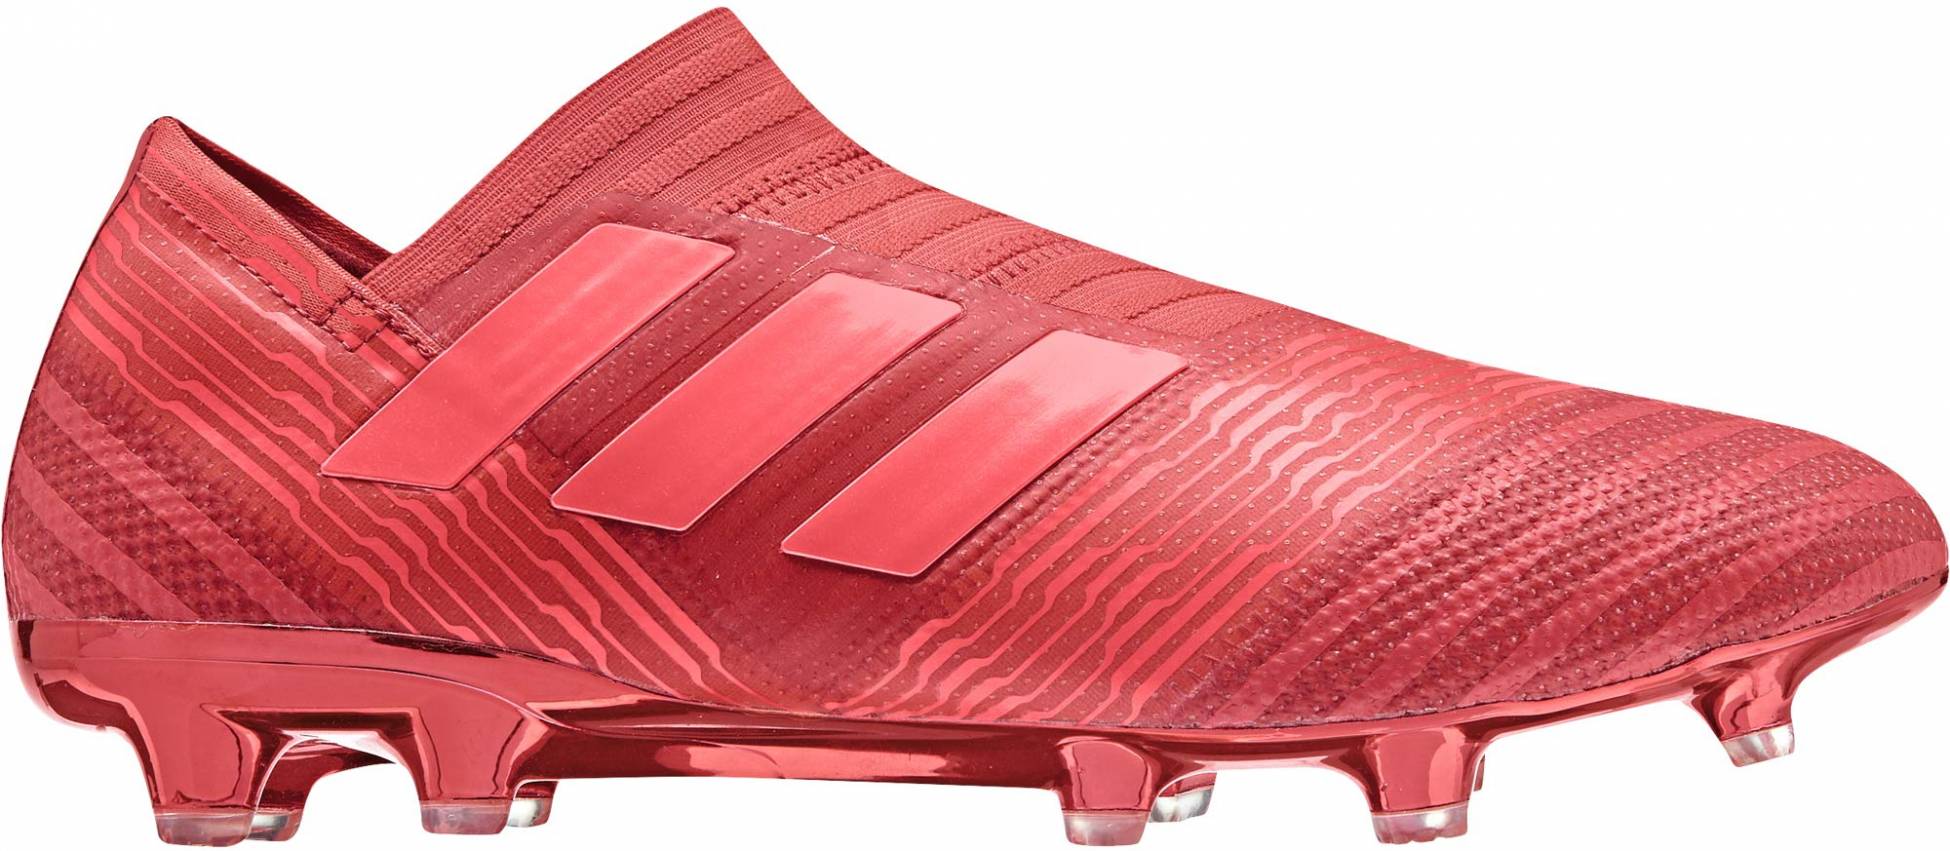 red football shoes